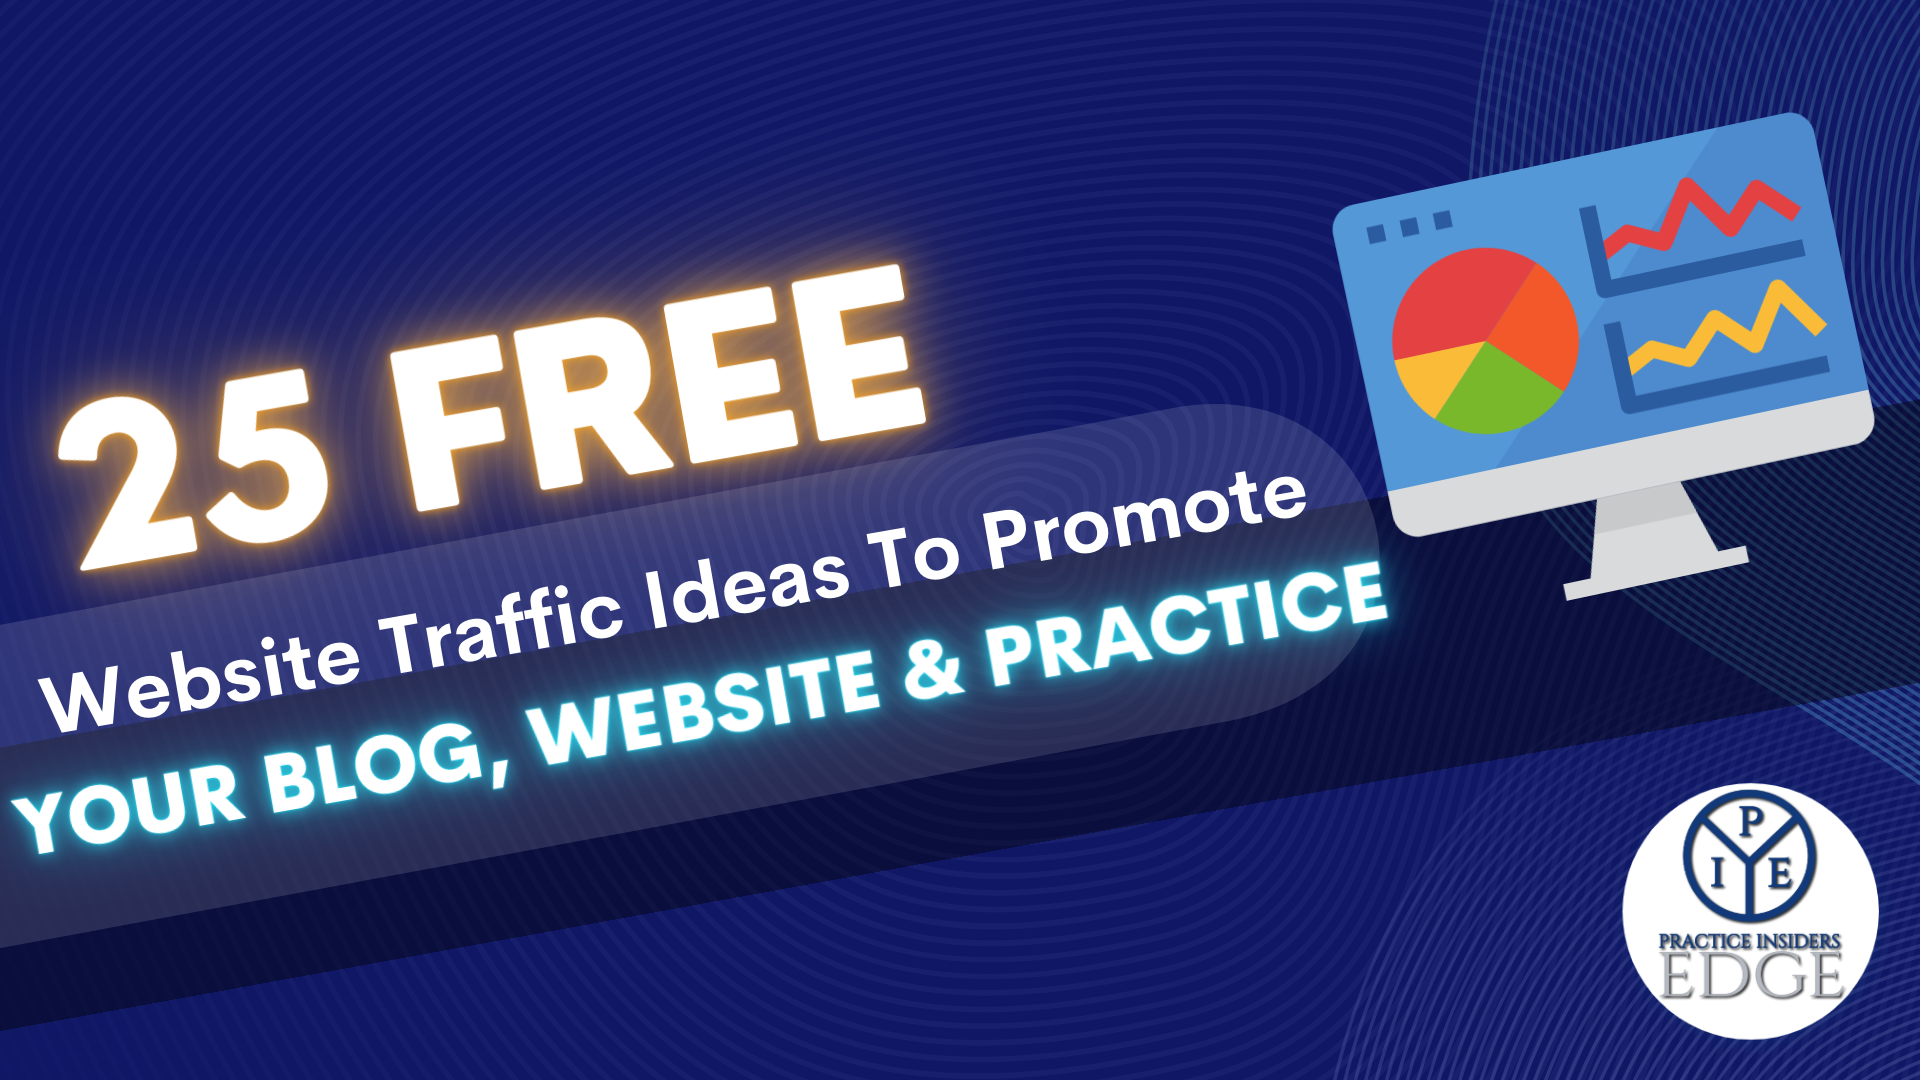 25 Free website traffic ideas to promote your blog, website, and practice